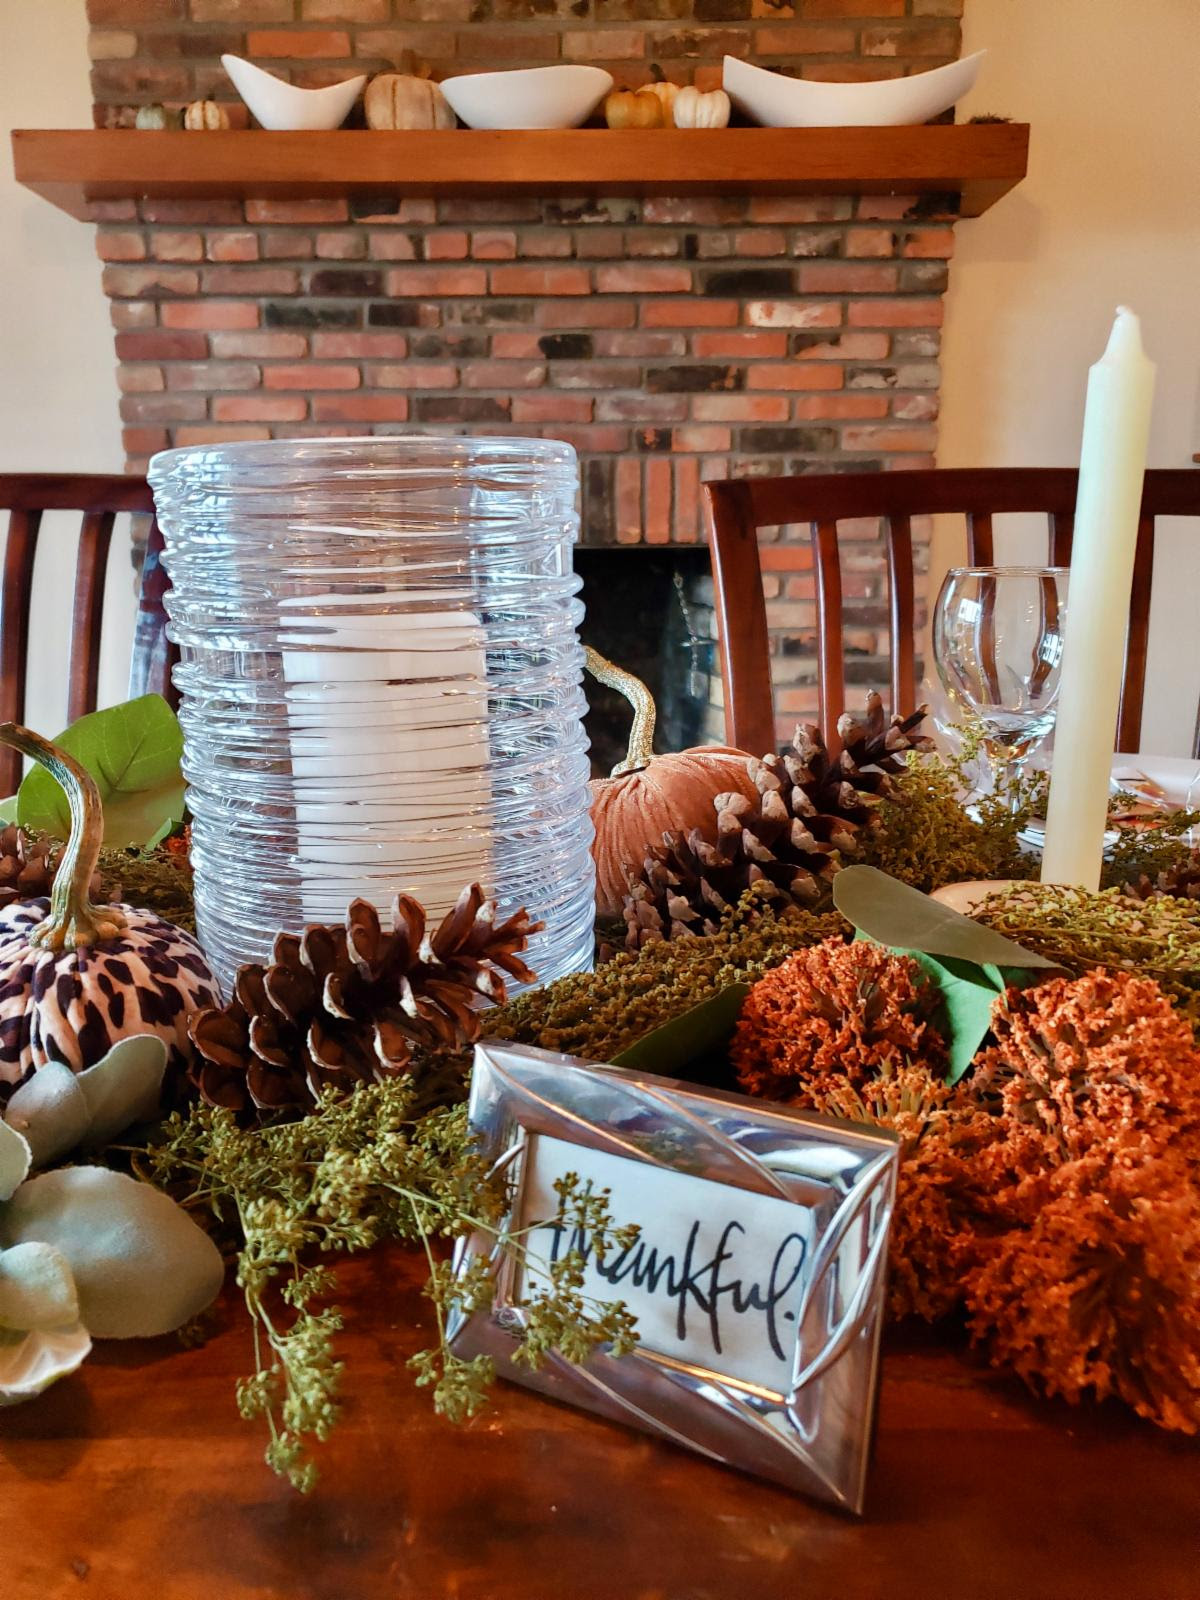 Photo of the place setting at head of school house at Thanksgiving.